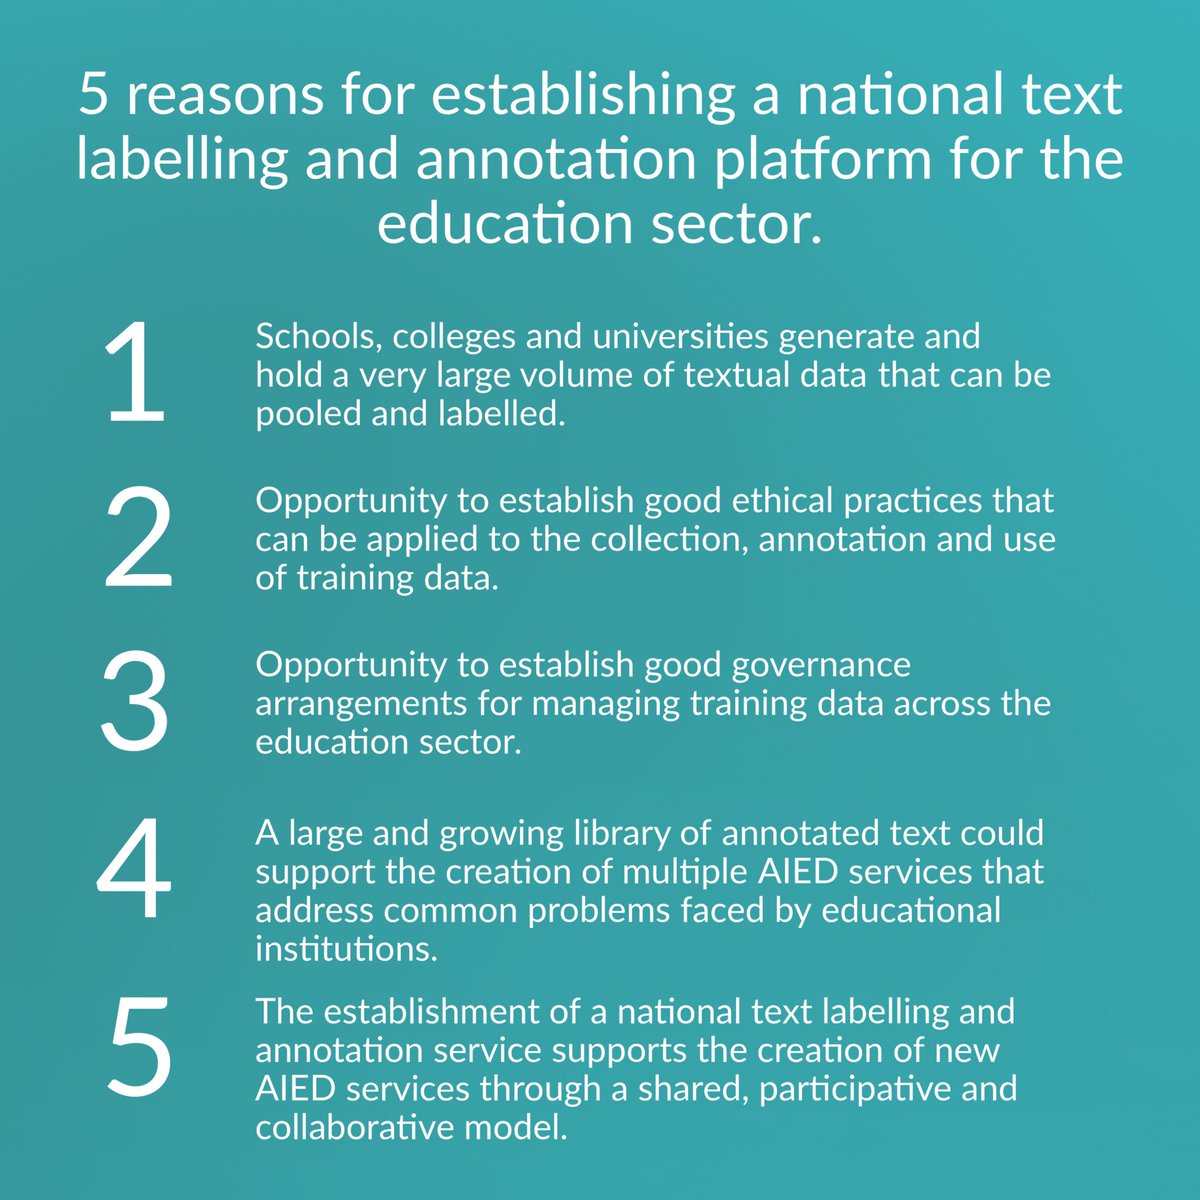 5 reasons for establishing a national text labelling and annotation platform for the education sector